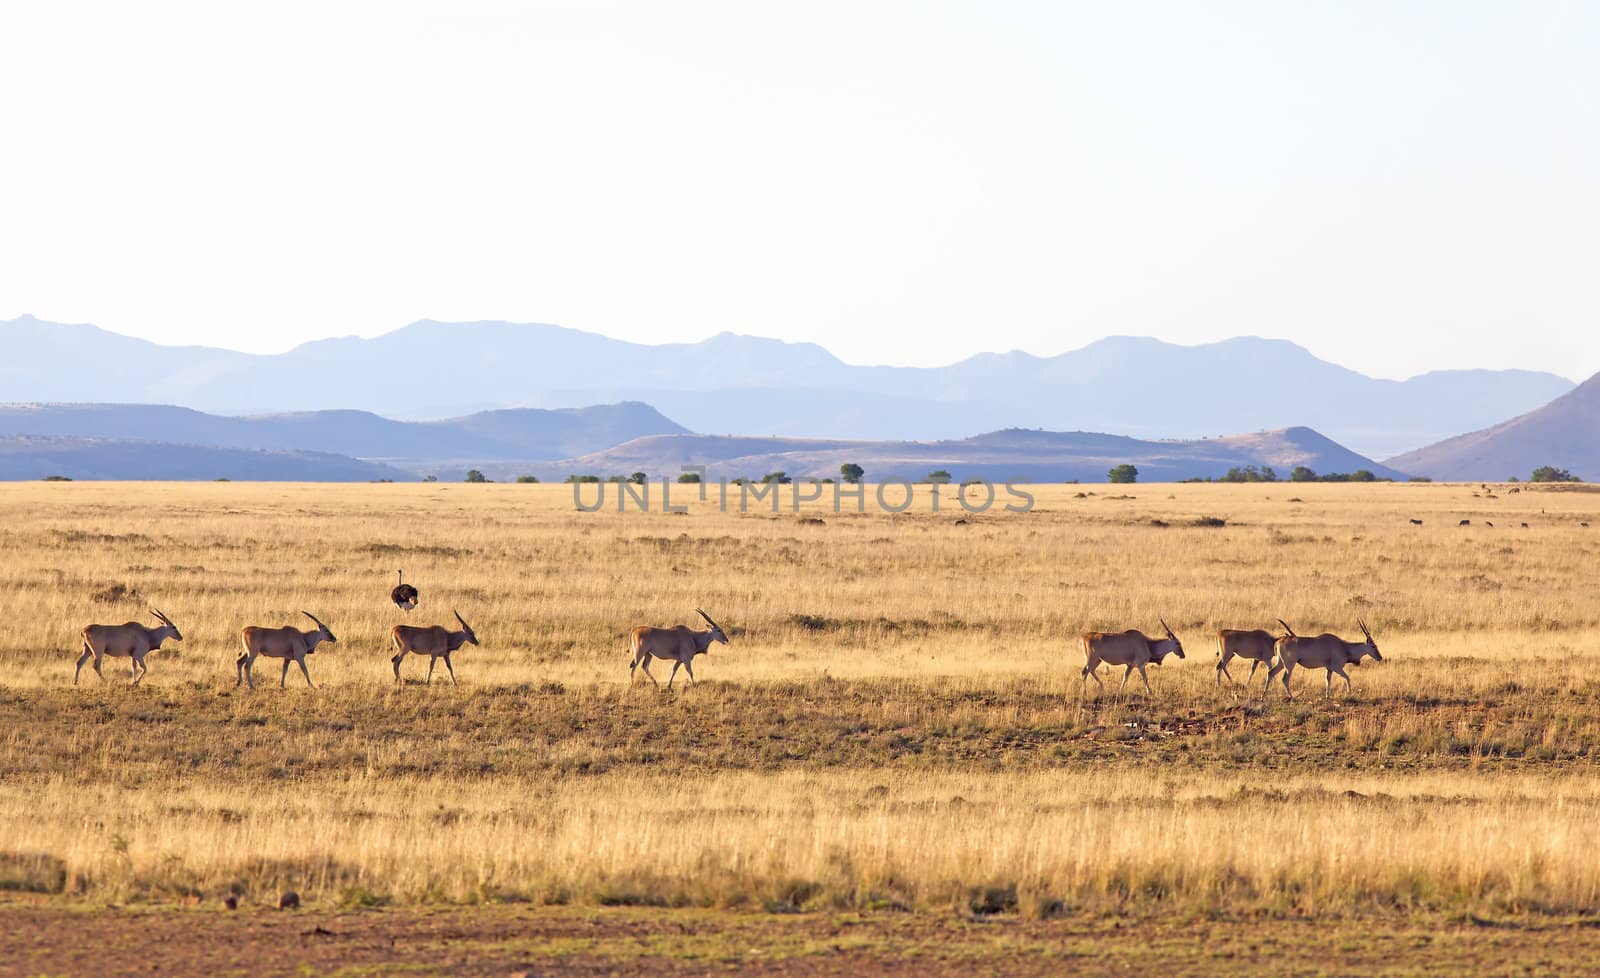 Eland (Taurotragus oryx) in the Mountain Zebra National Park, South Africa.